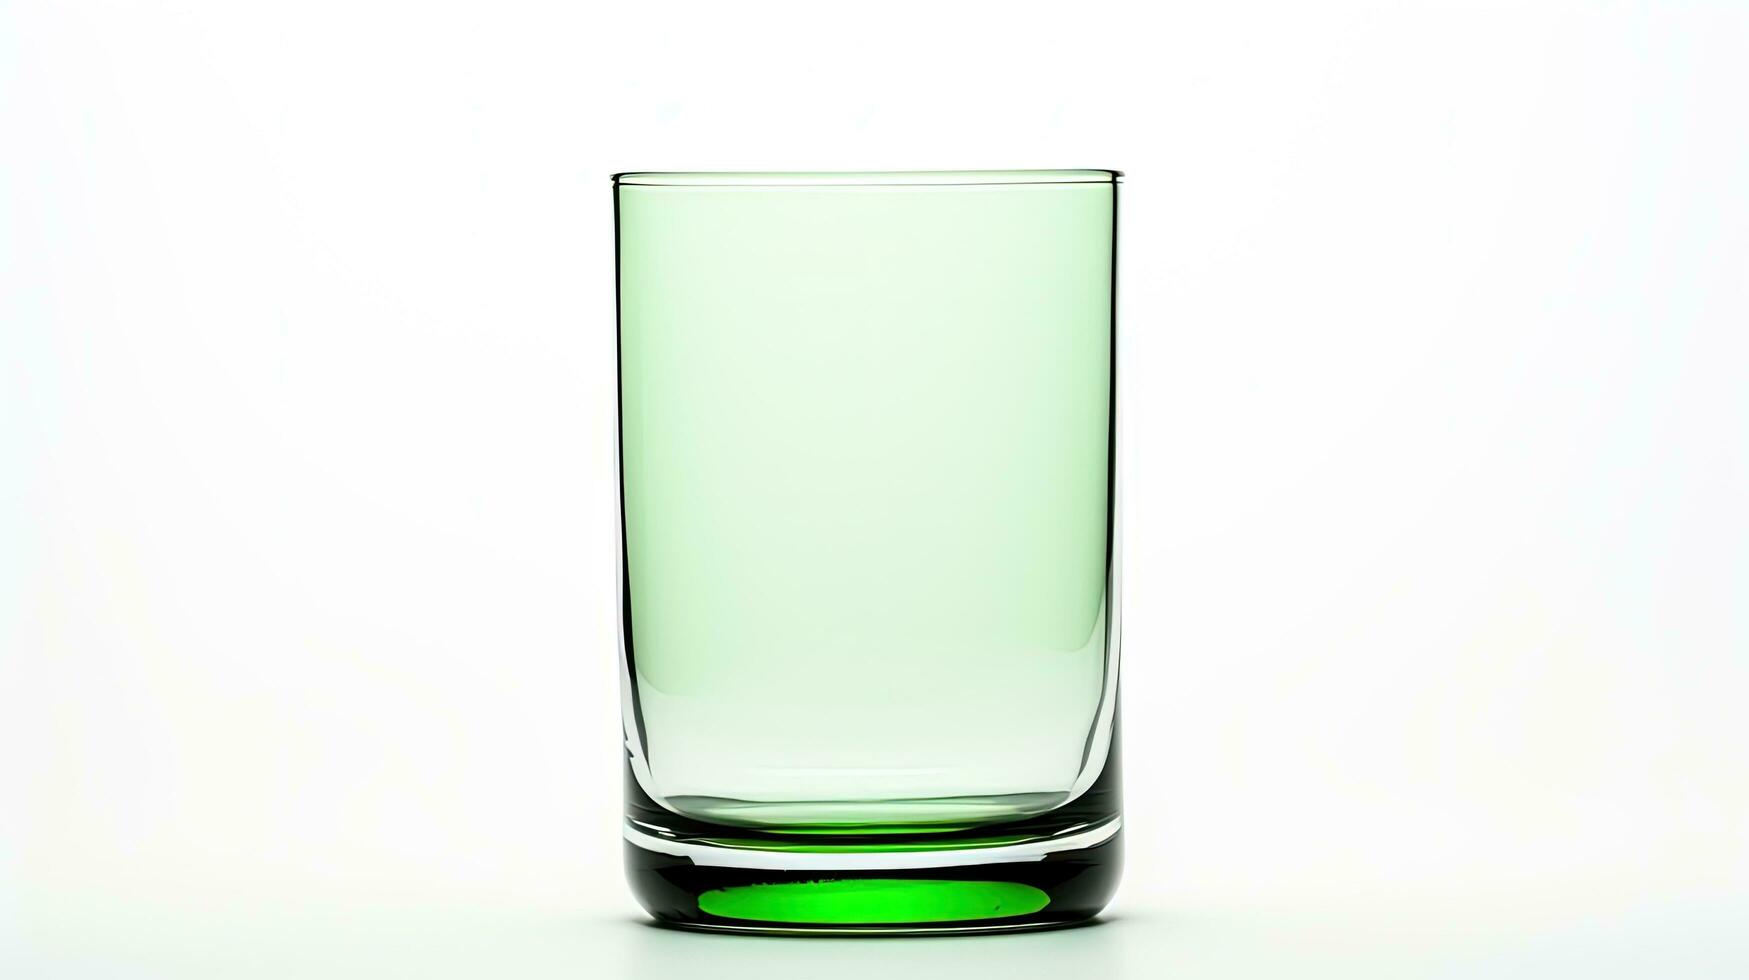 Isolated green glass on white background. silhouette concept photo